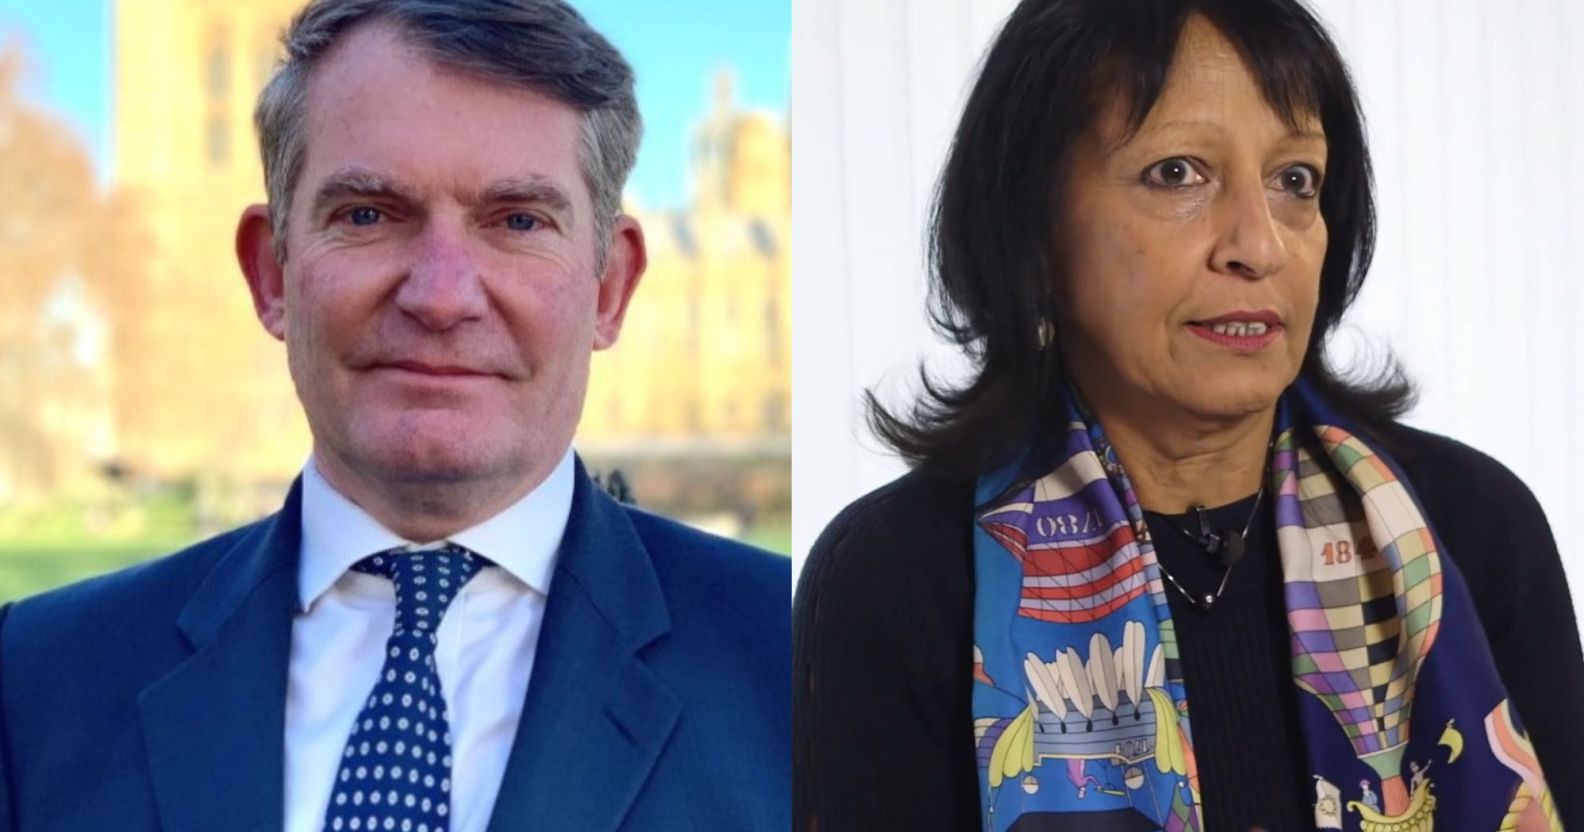 An edited split image of EHRC CEO Marcial Boo and Commission chair Kishwer Falkner.